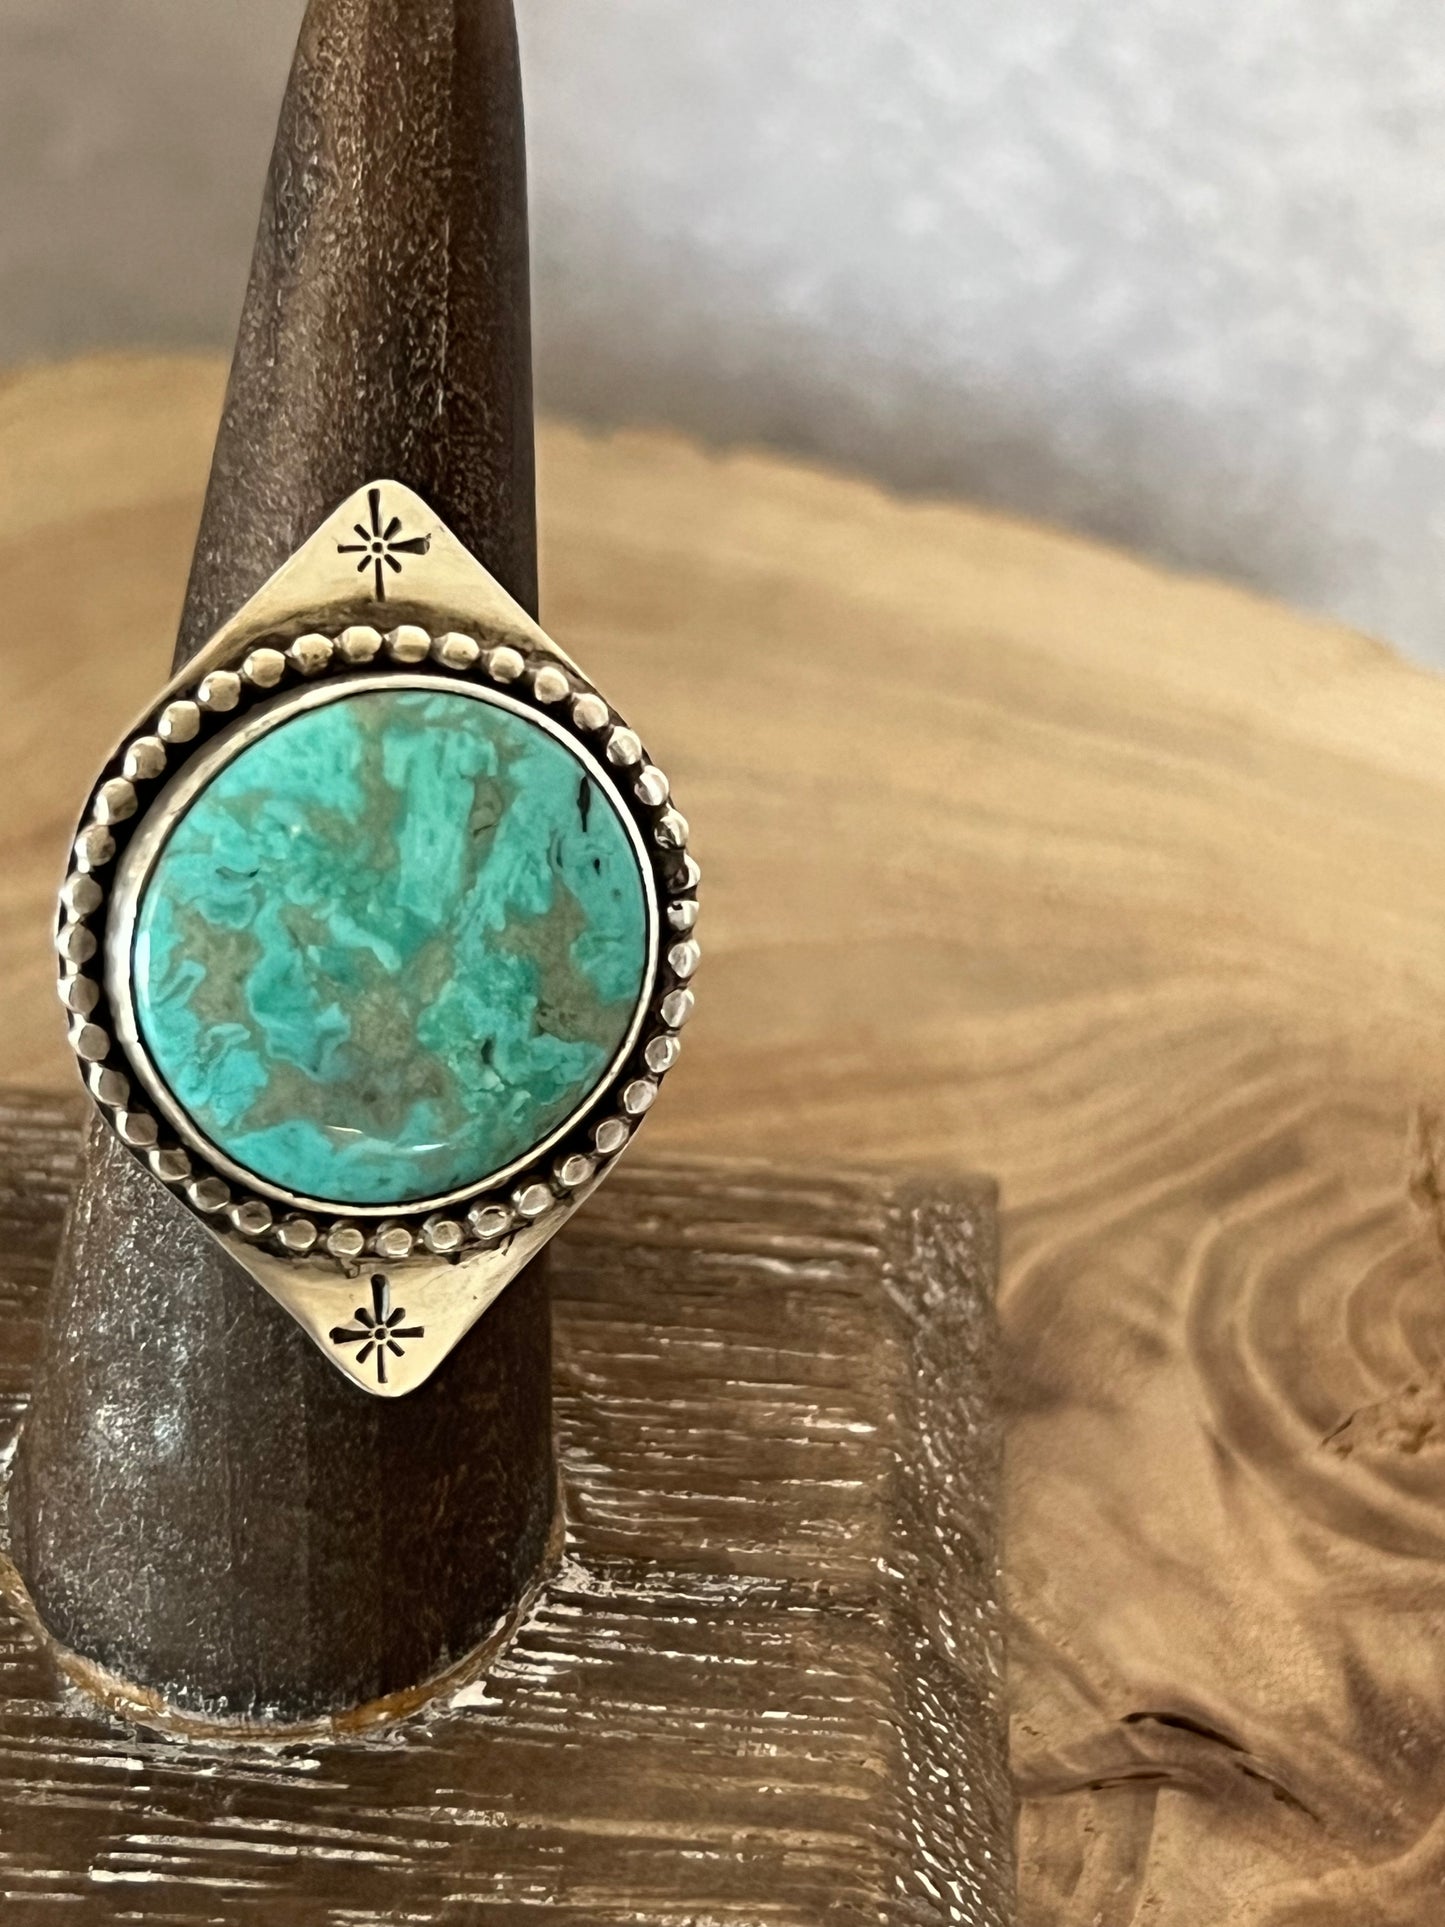 Stormy mountain round ring with copper